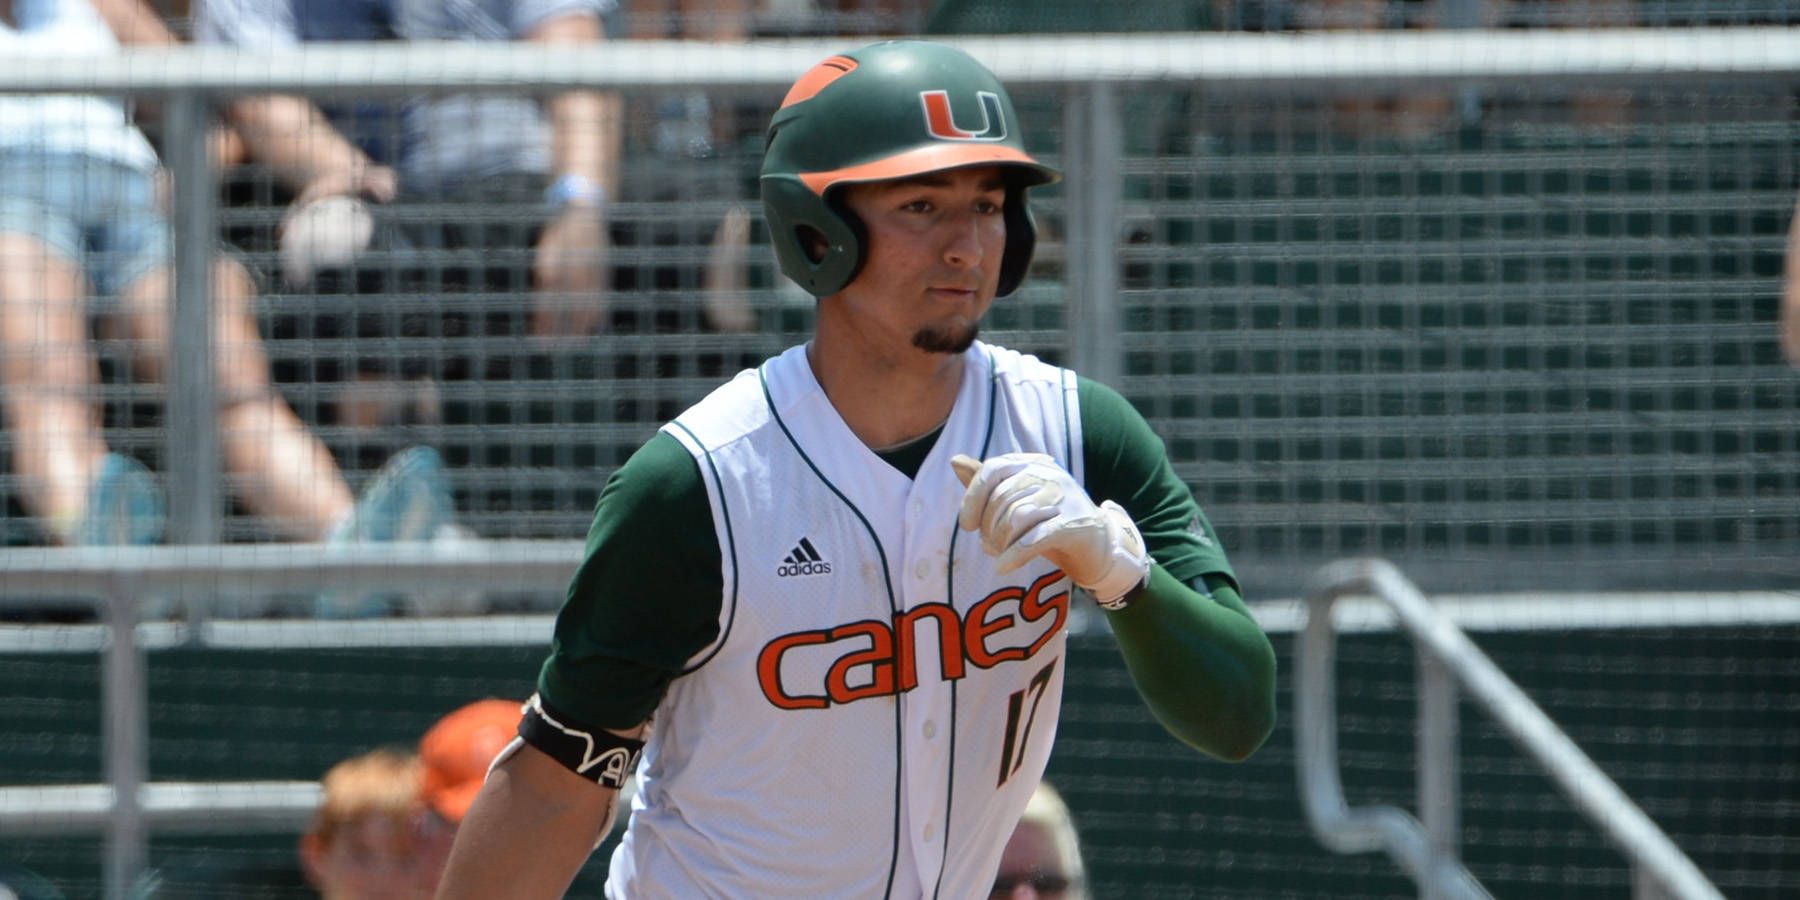 Miami Drops Rubber Match to Wake Forest, 9-0